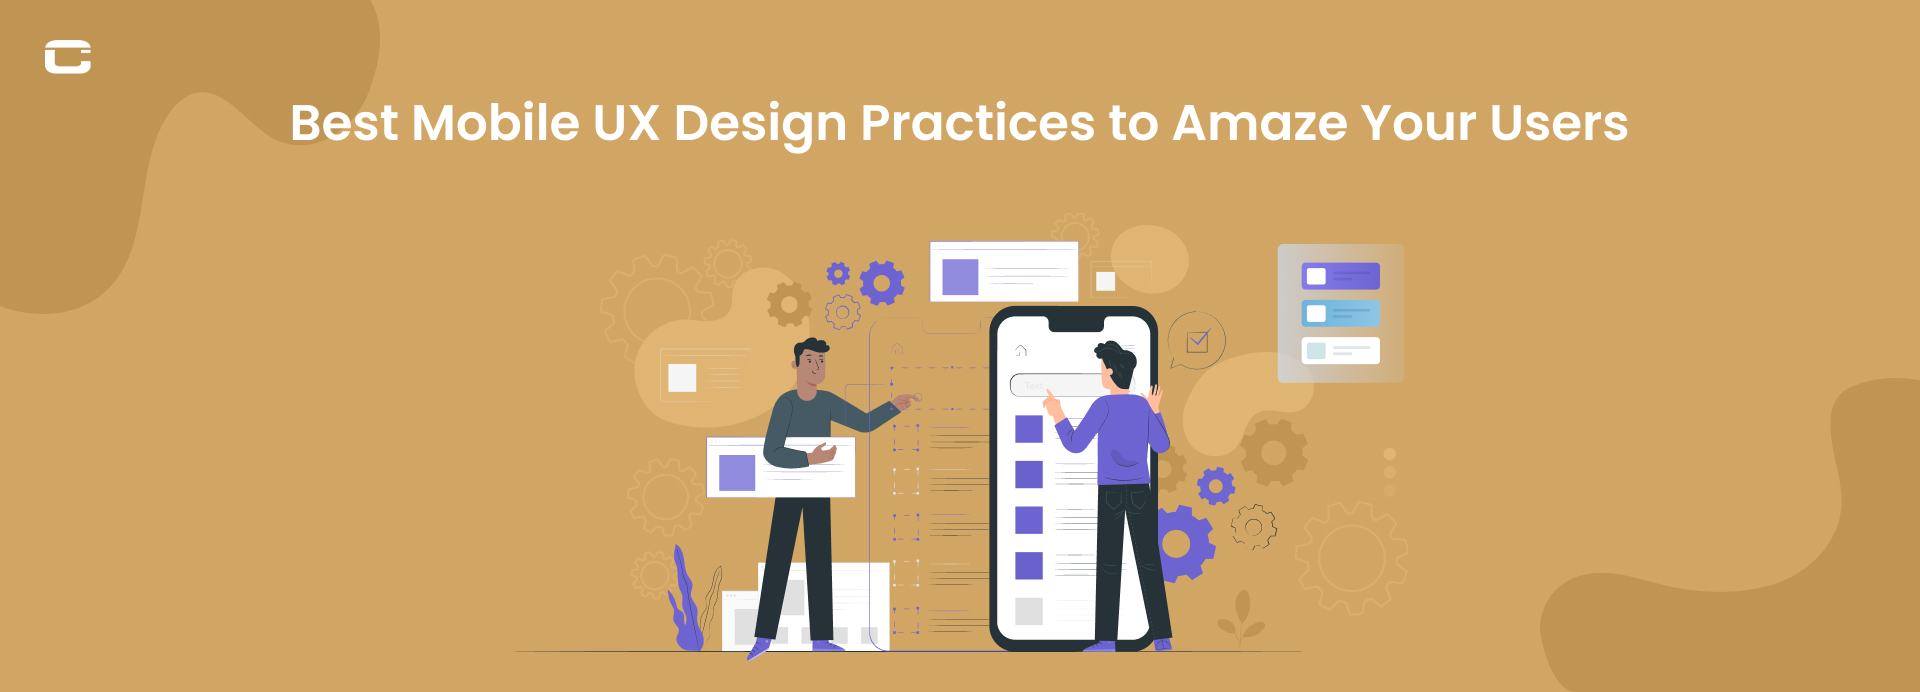 Best Mobile UX Design Practices to Amaze Your Users